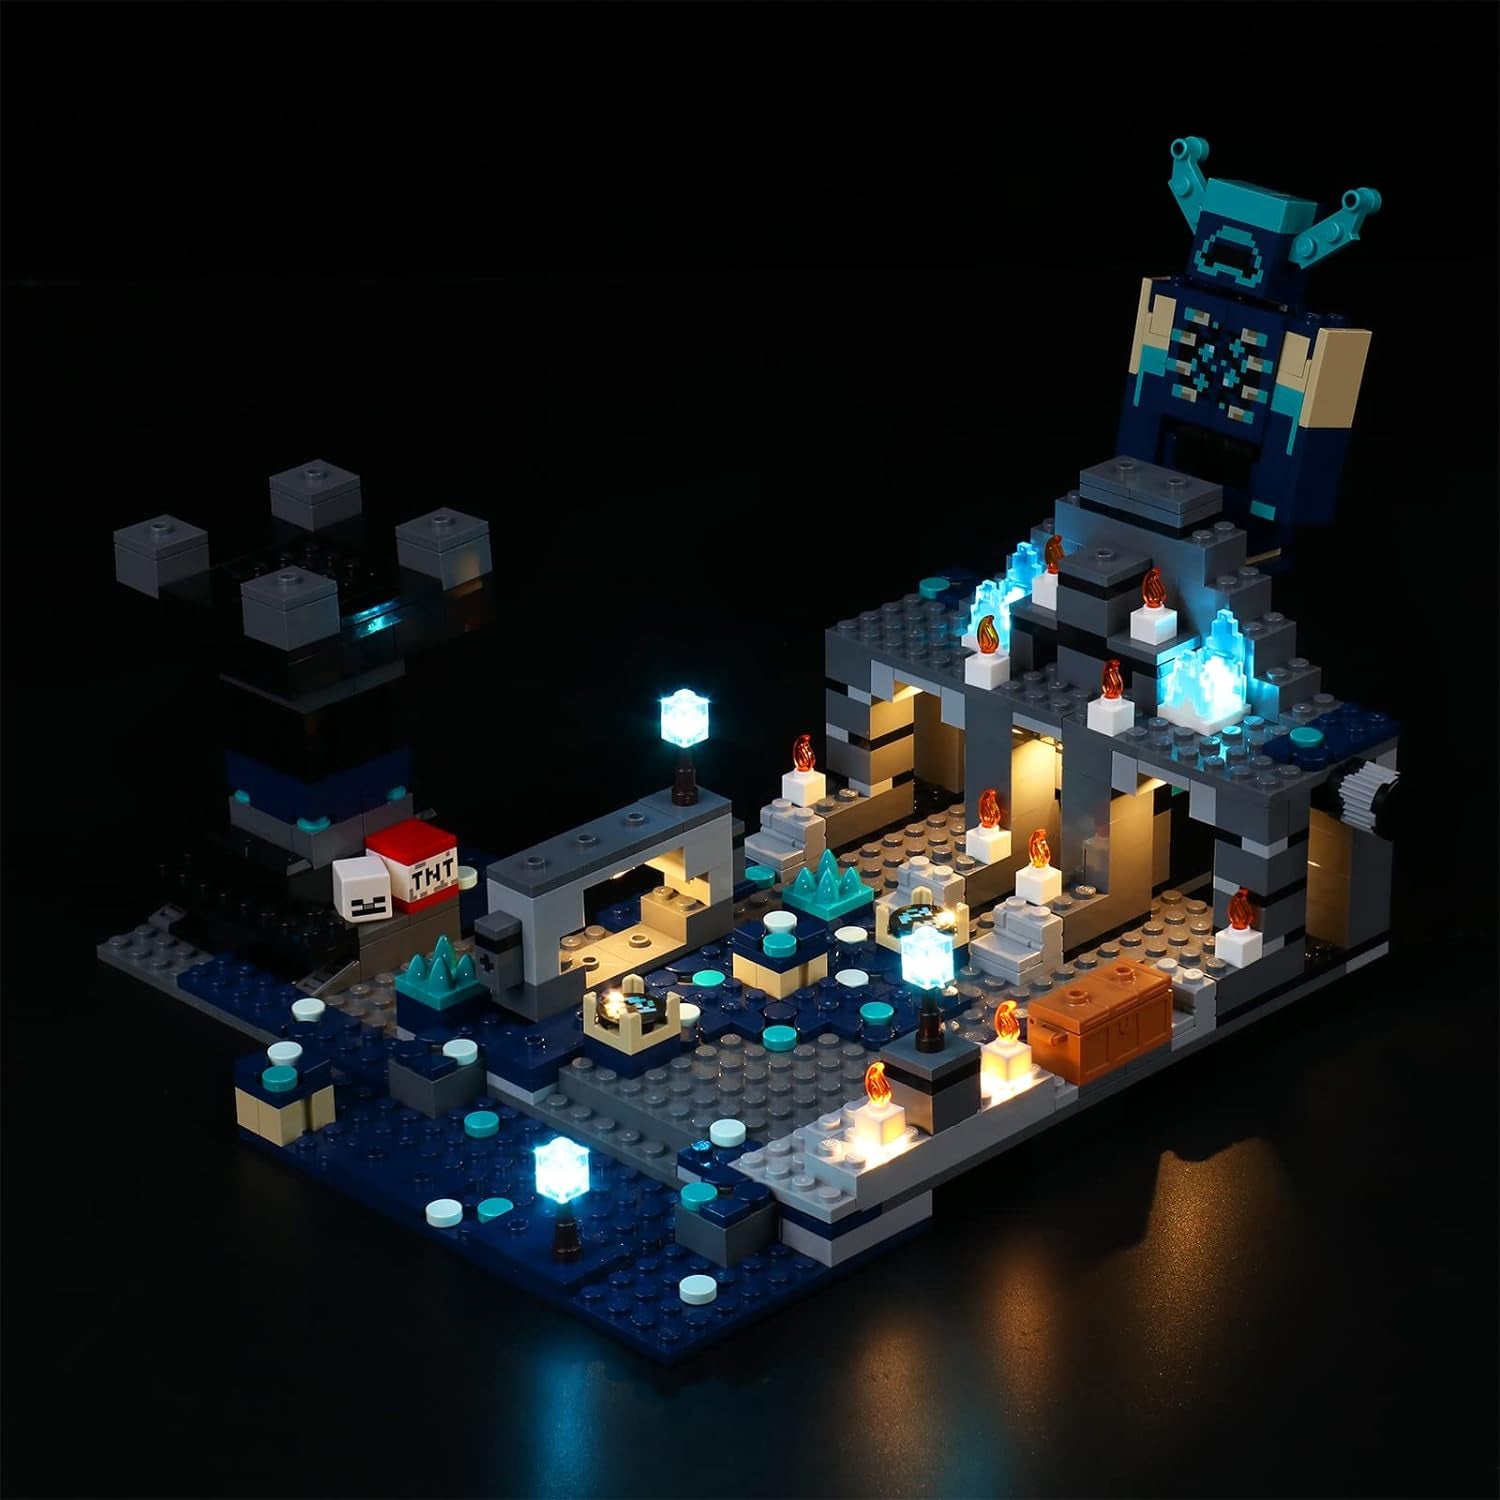 Light Kit for Lego the Deep Dark Battle Playset, Creative Lighting Compatible with Lego 21246, Great Gift for Kids Aged 10+(Lights Only, No Bricks)